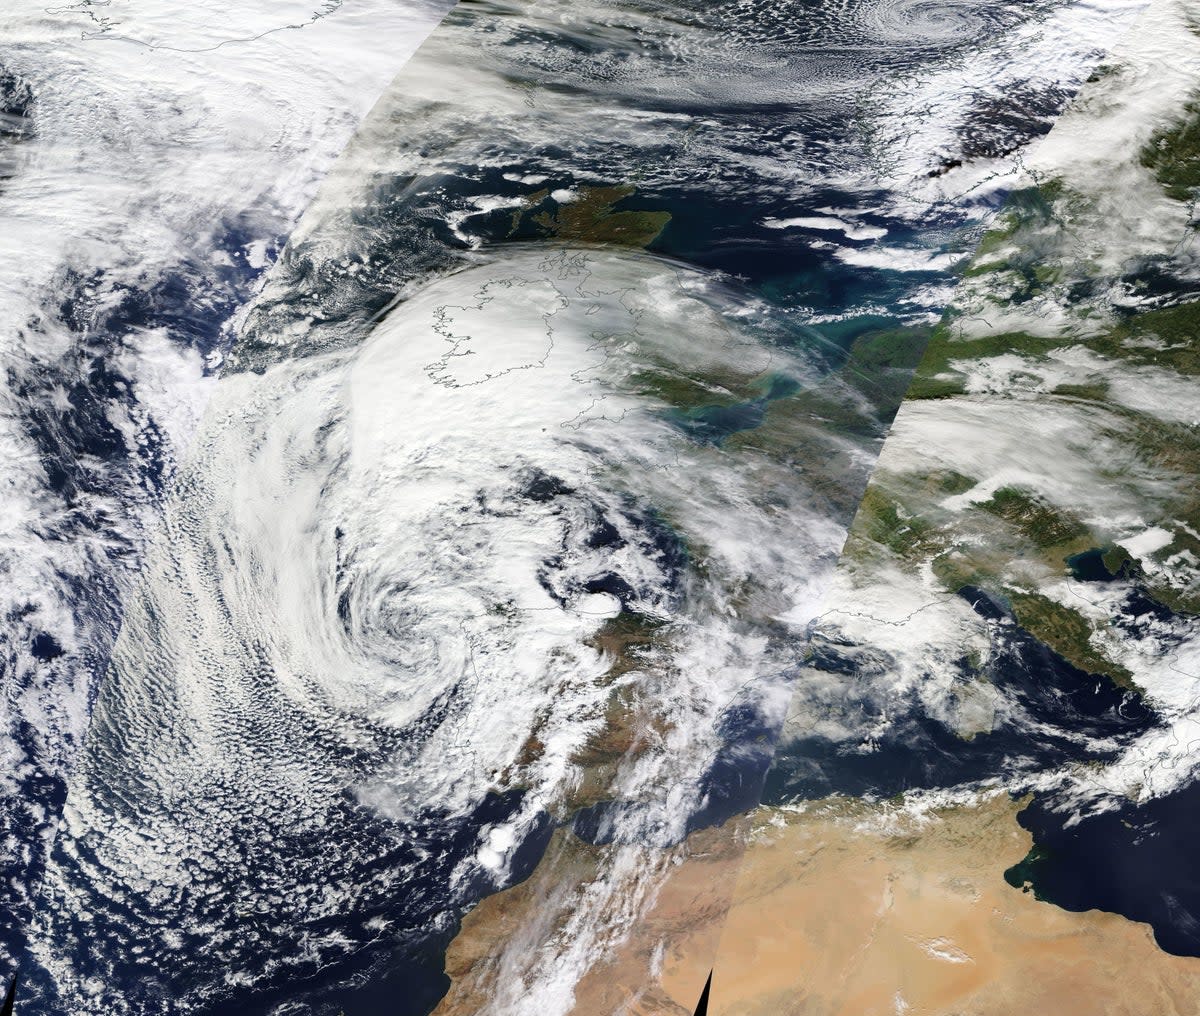 The UK is braced for Storm Babet to hit this week (EOSDIS/NASA/SWNS)